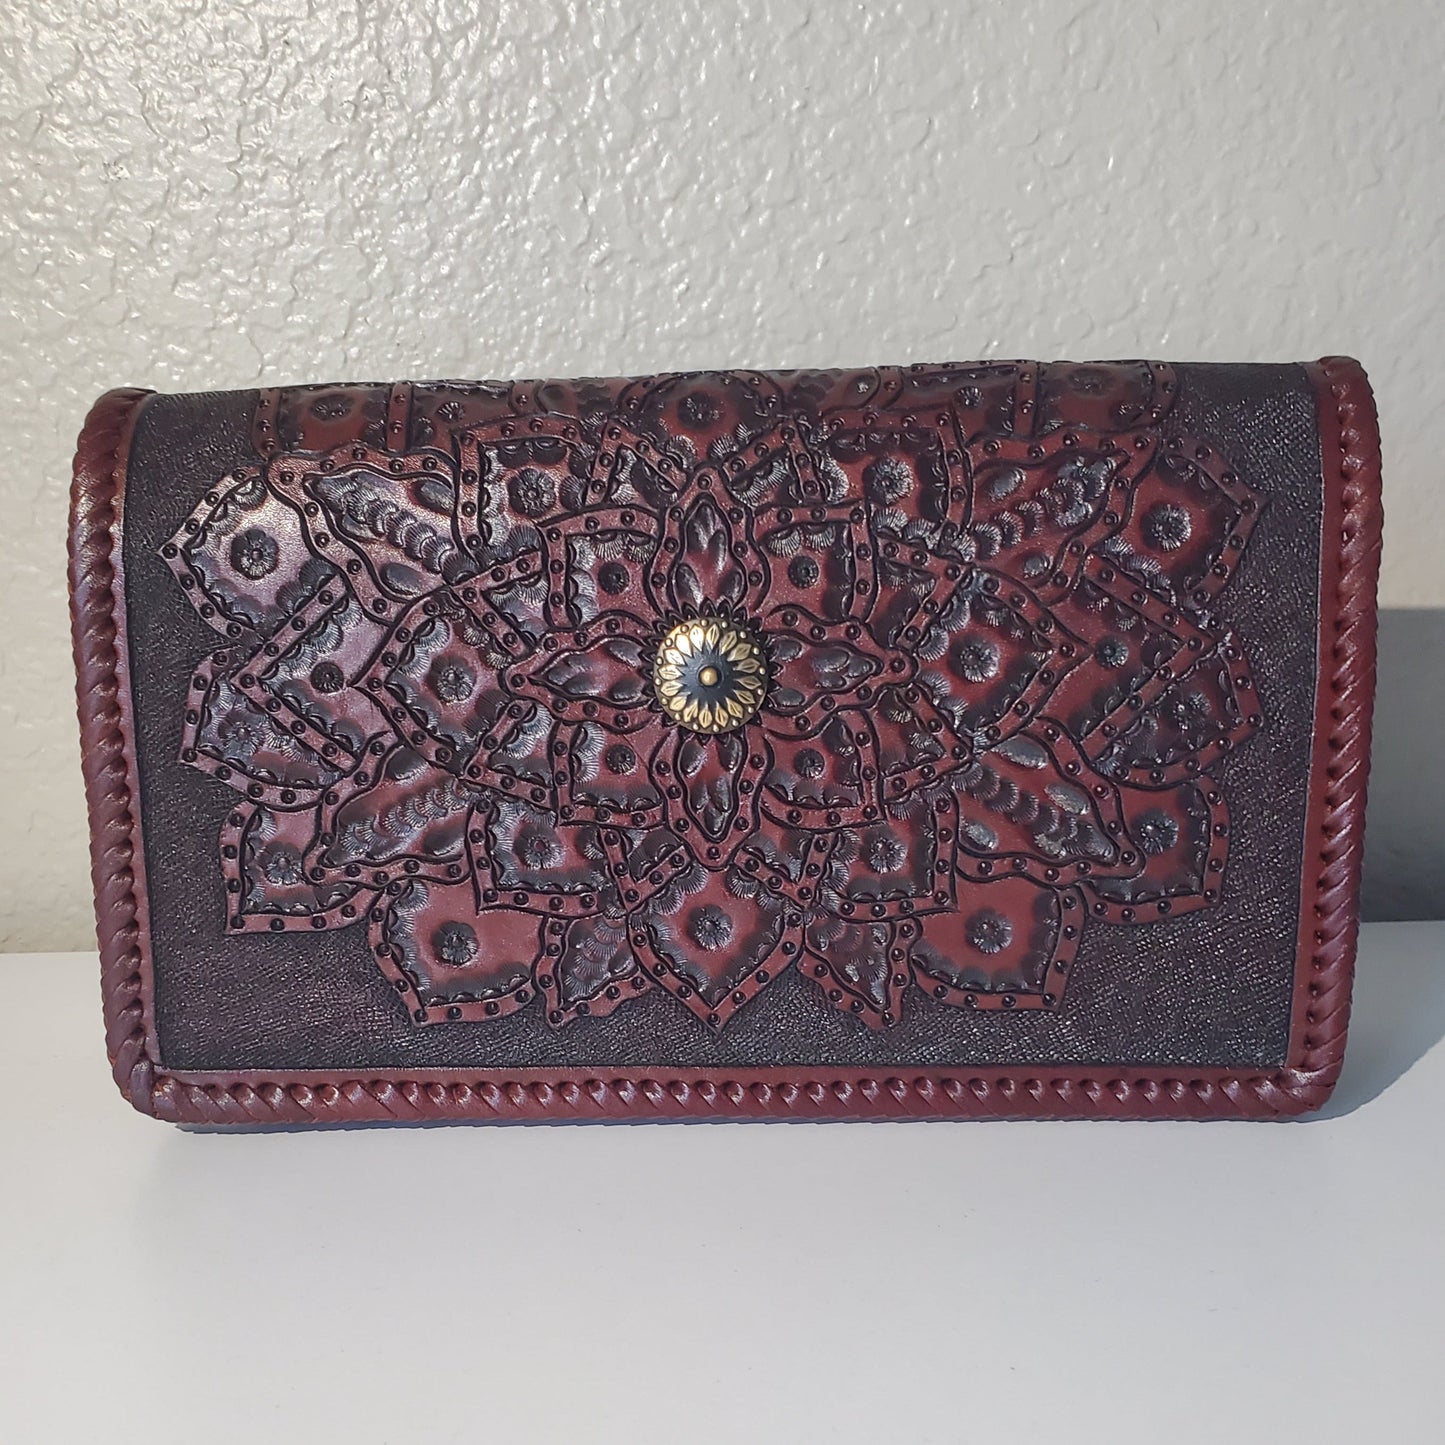 Hand Made Leather Crossbody Bag "CECELIA" by MIOHERMOSA Brown Cecilia Flower